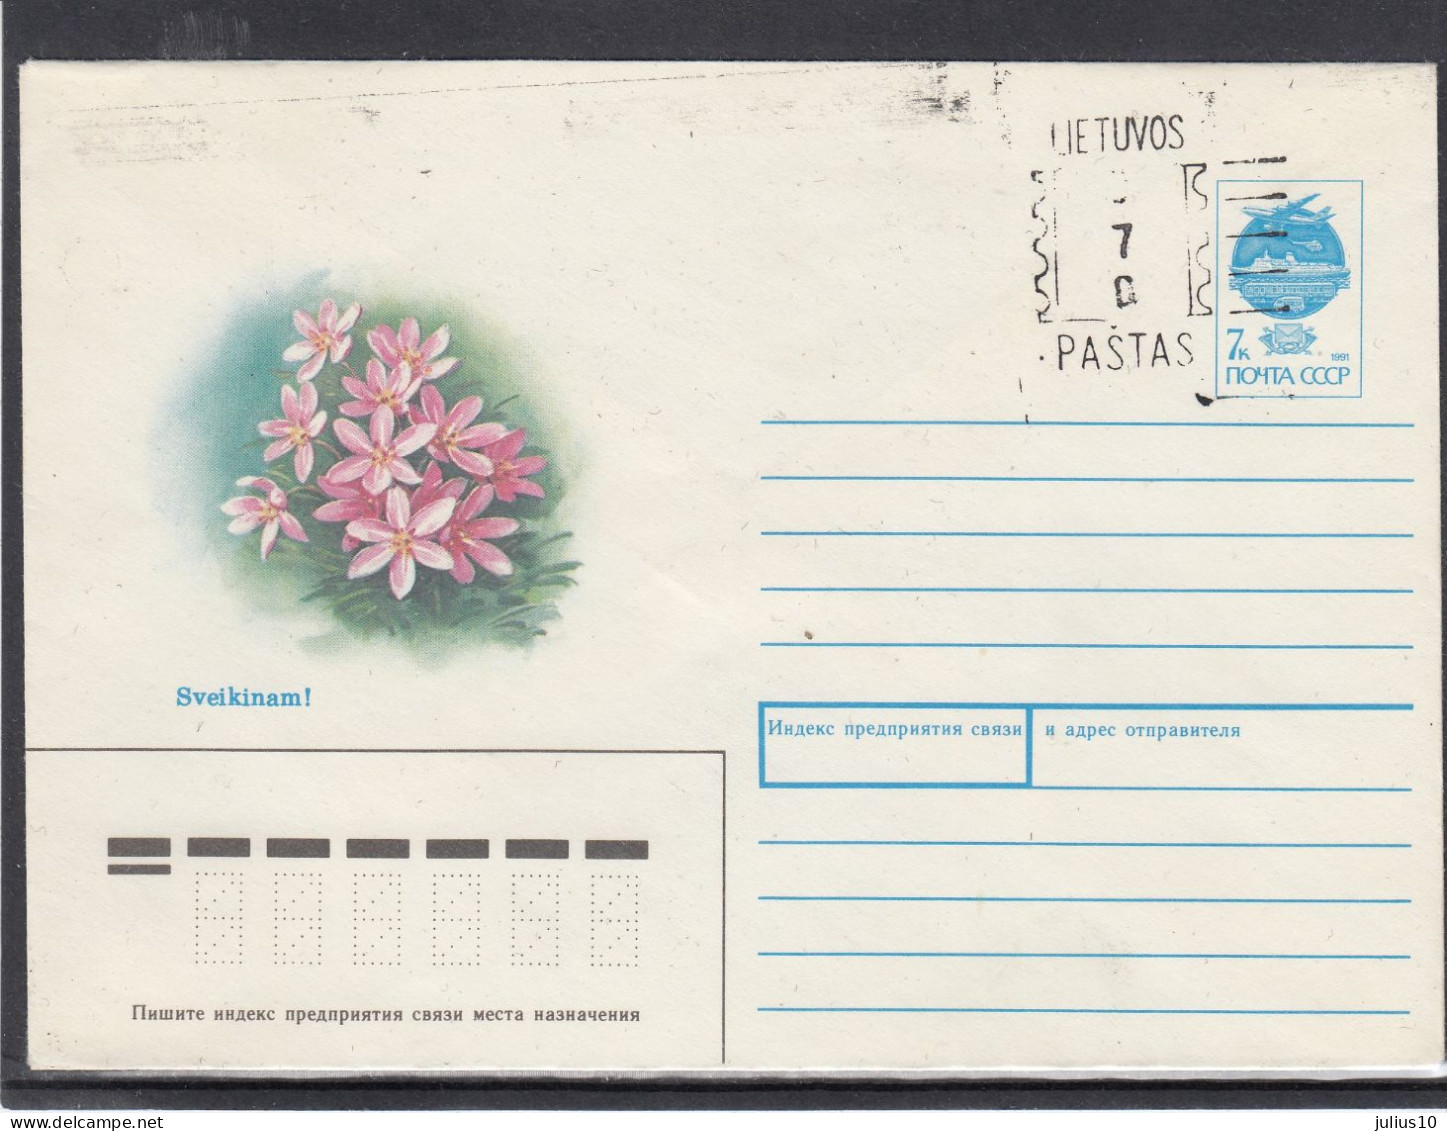 LITHUANIA (USSR) 1990 Cover Greetings Flowers #LTV64 - Lithuania